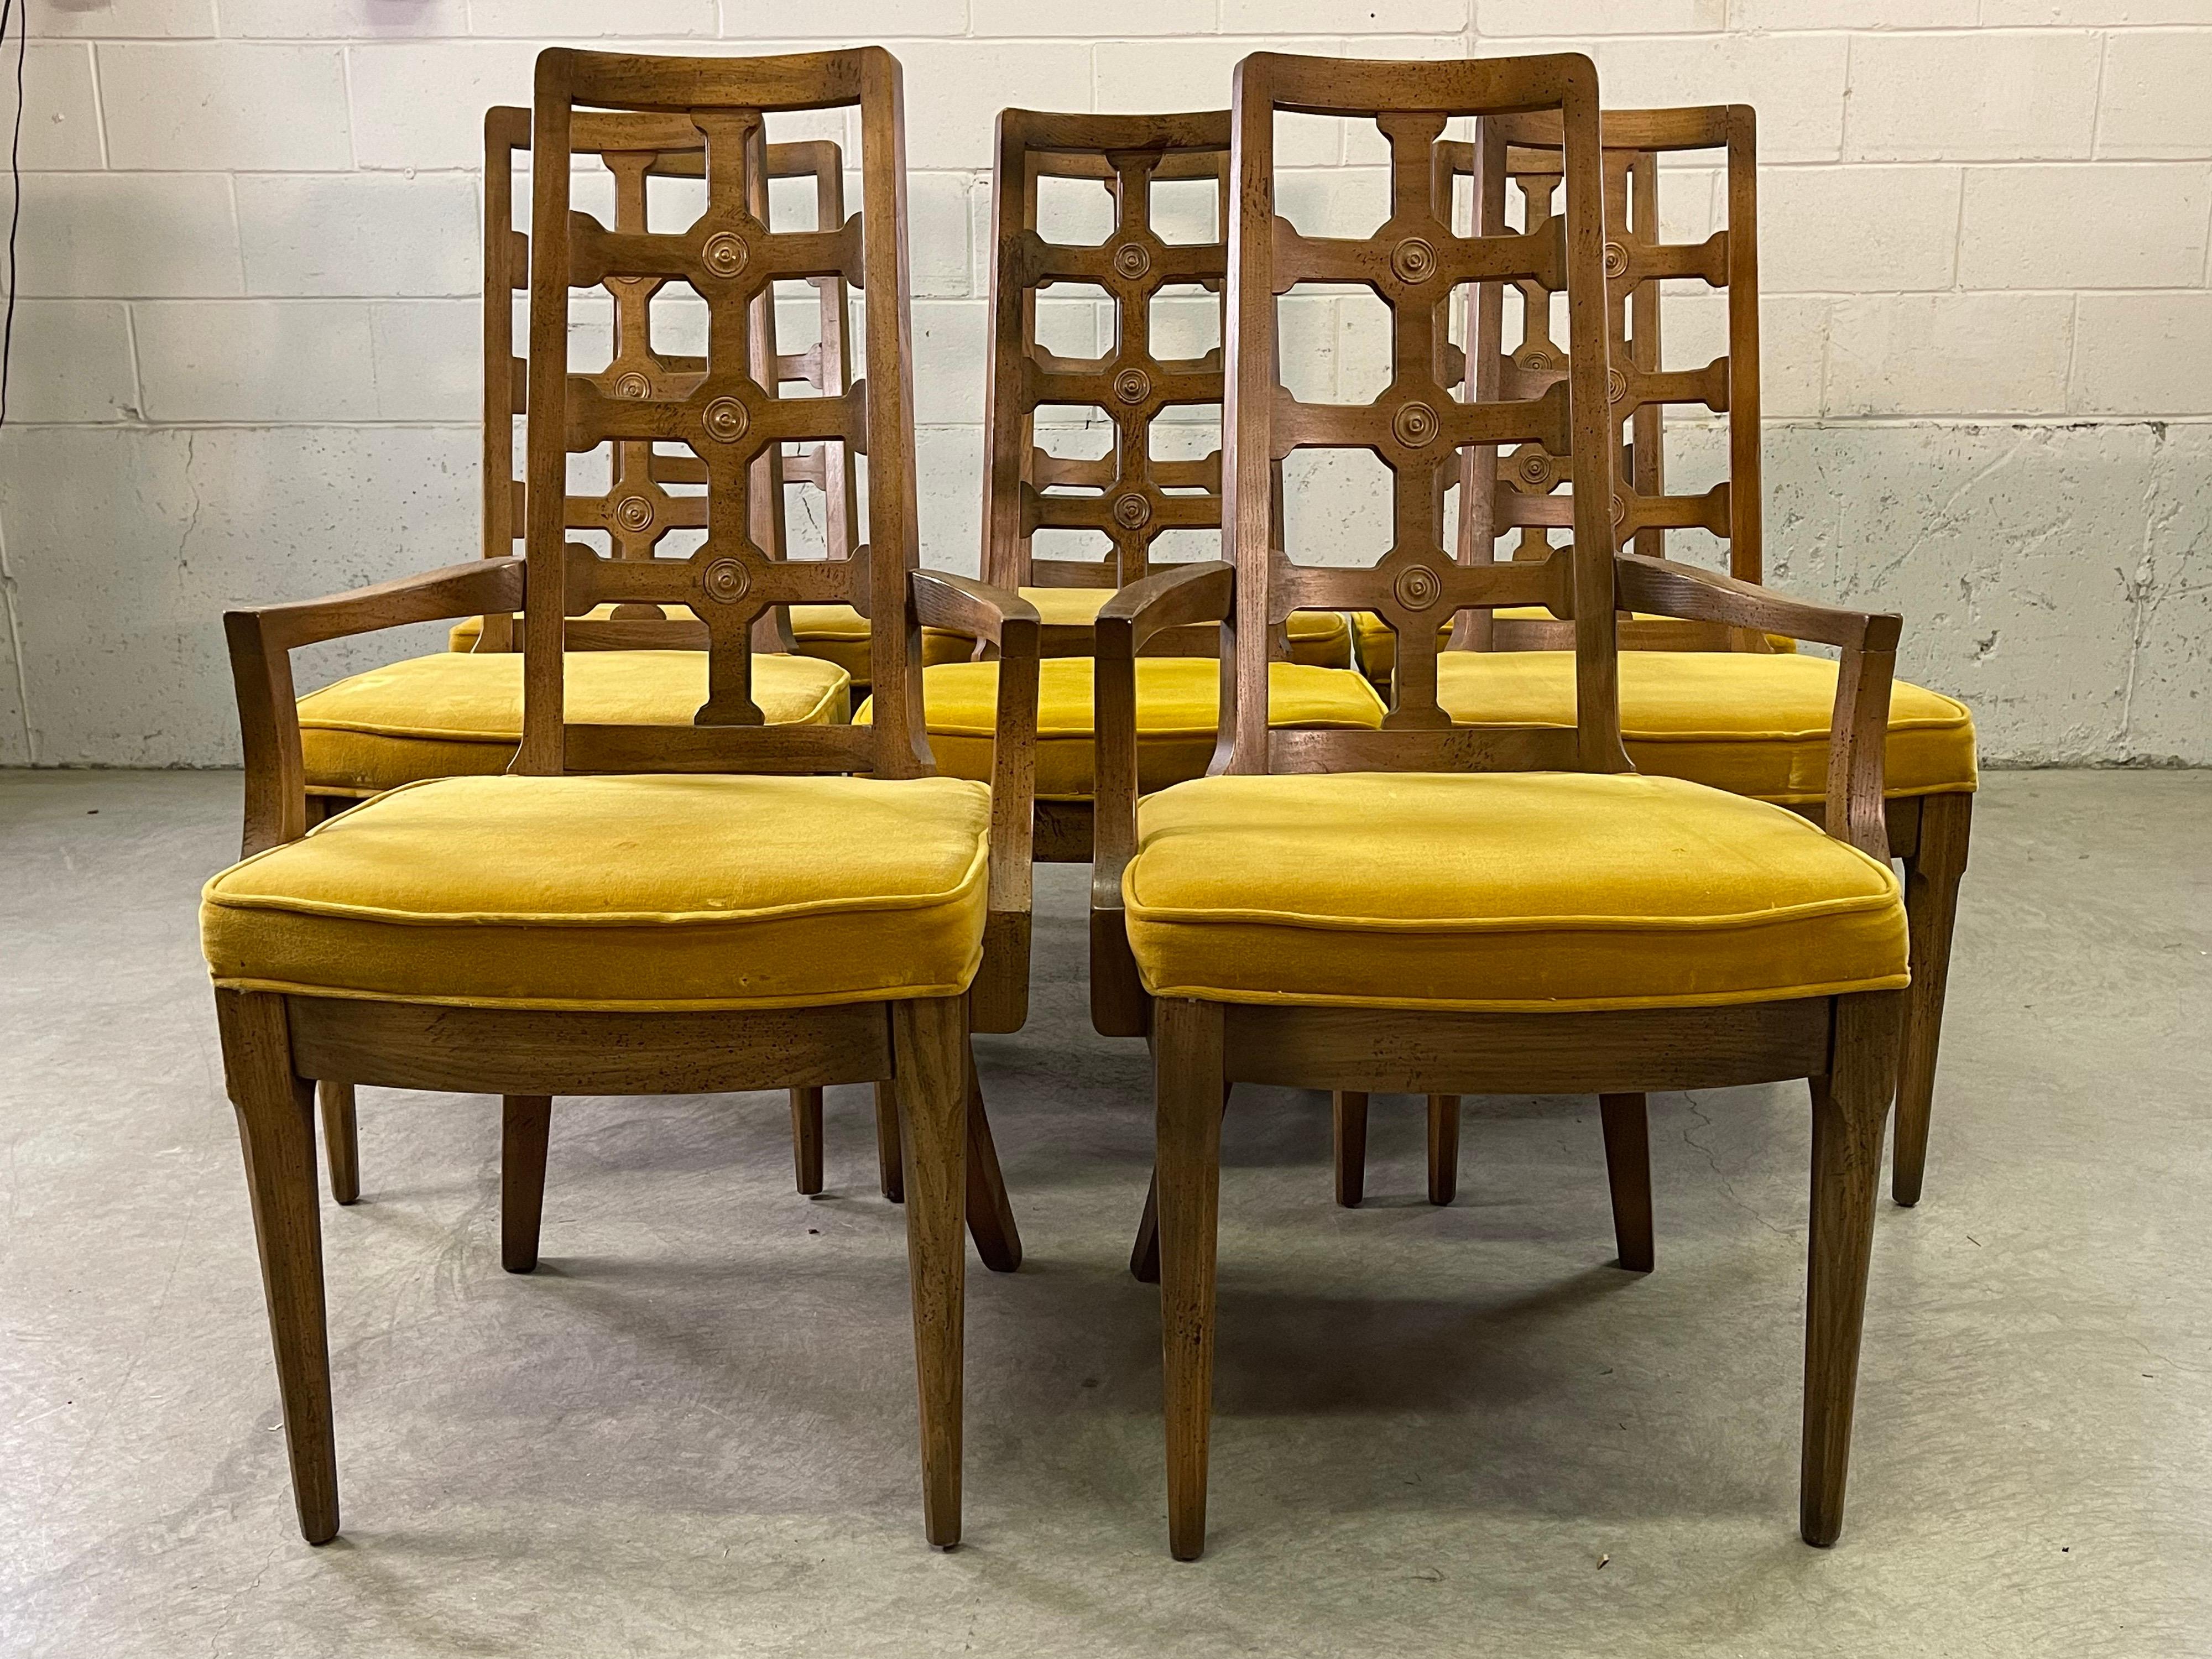 1960s Dining Table with 8 Chairs 6